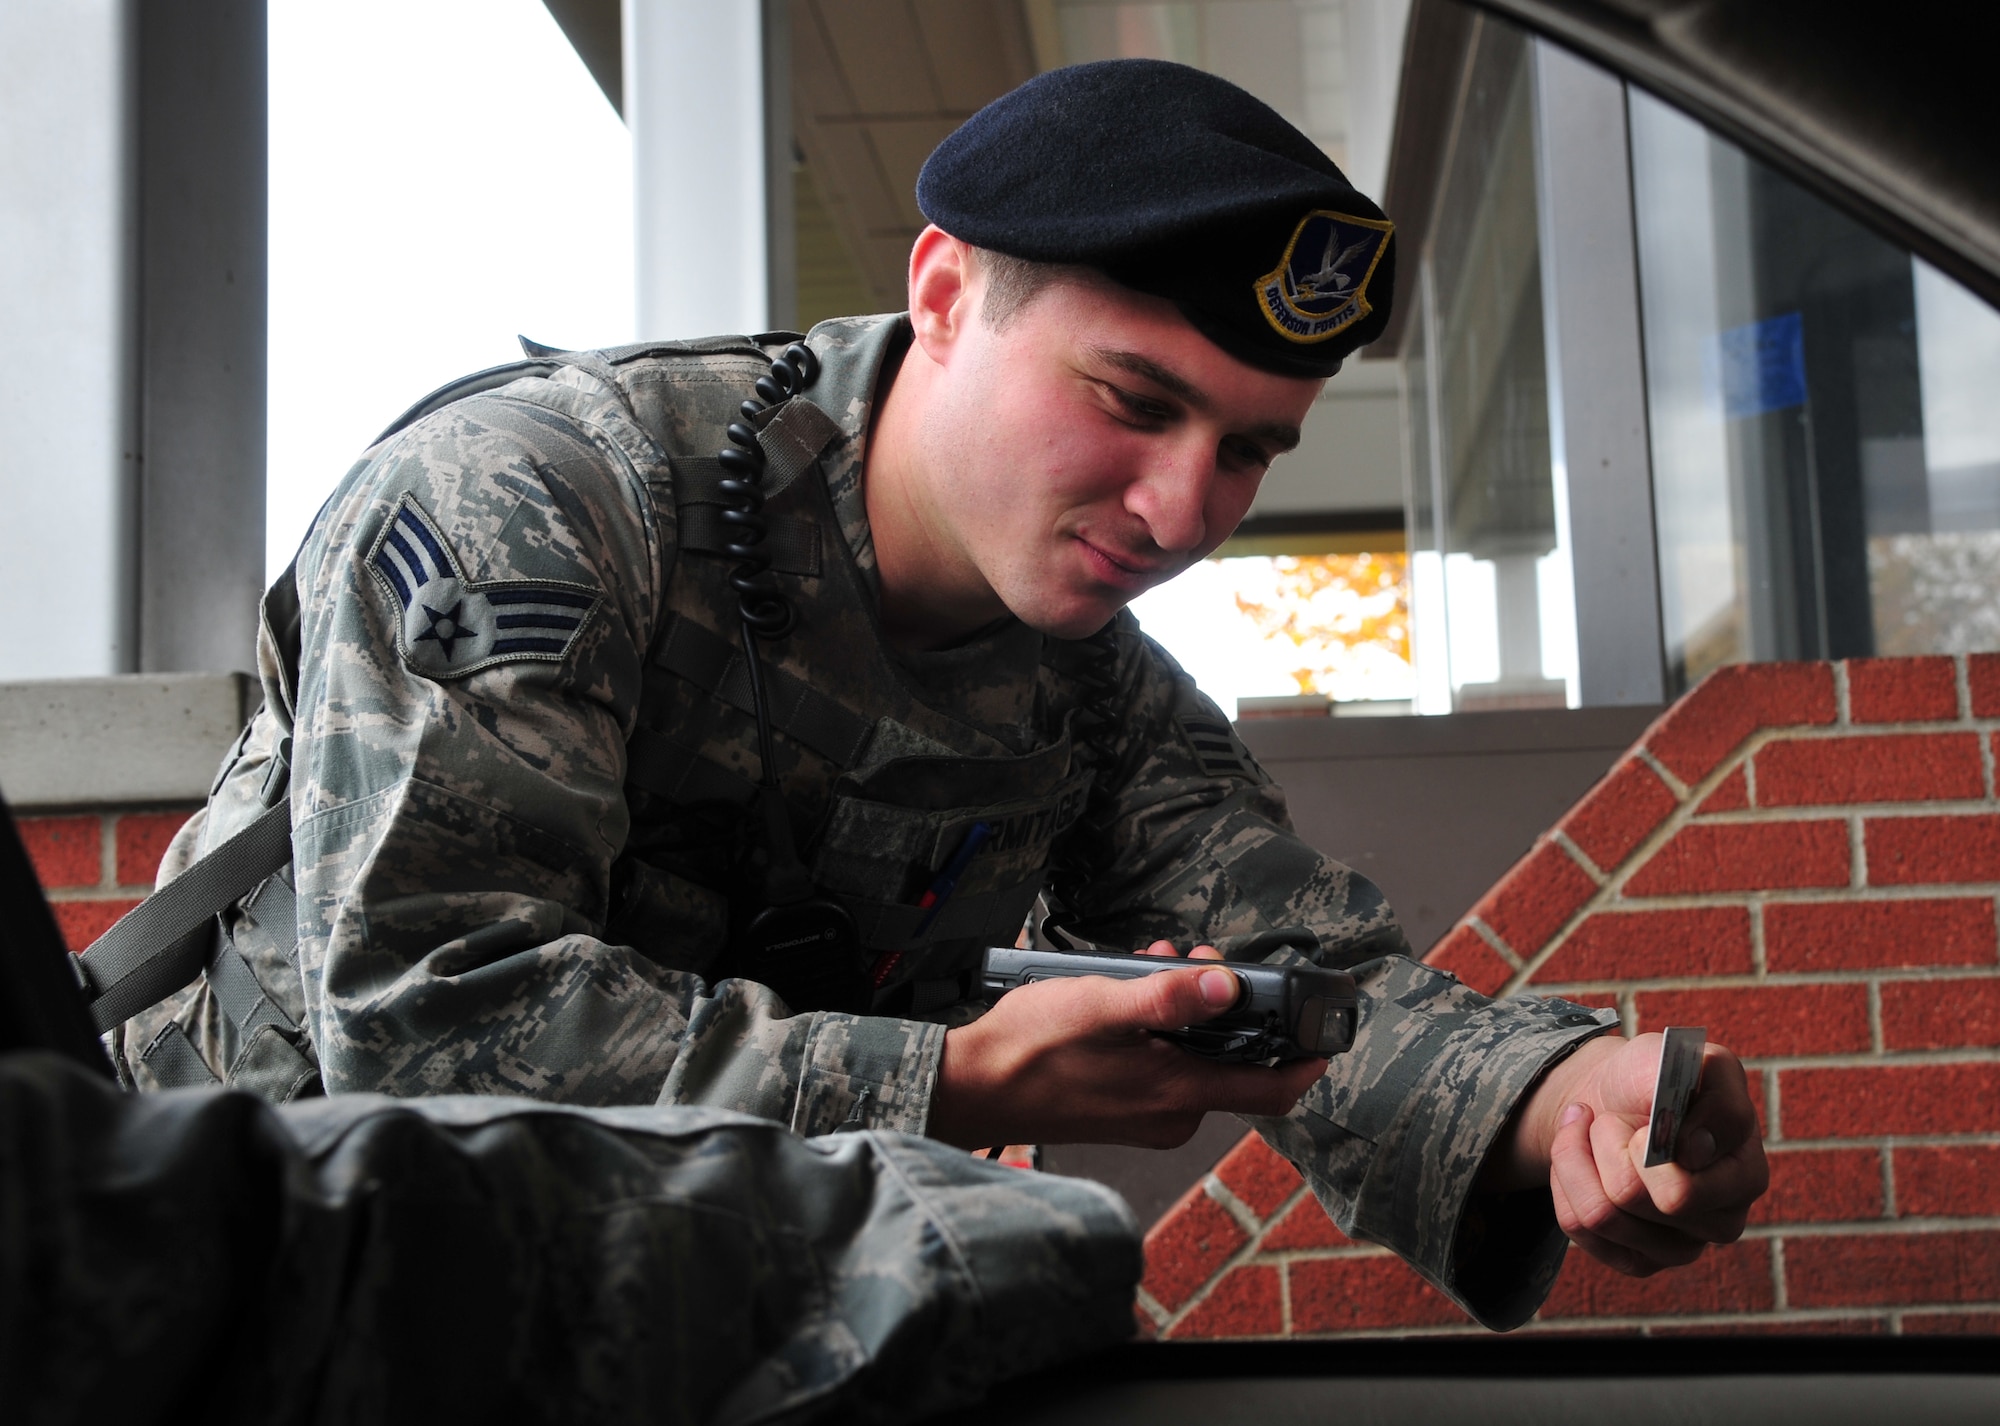 Senior Airman Christopher Armitage checks the common access card of a Fairchild member Oct. 19, 2012 at the main gate. When he’s not working the main gate Wednesday through Saturday, Armitage also does stand-up comedy in downtown Spokane on Monday nights. He is an installation entry controller with the Security Forces Squadron. (U.S. Air Force photo by Airman 1st Class Earlandez Young) 